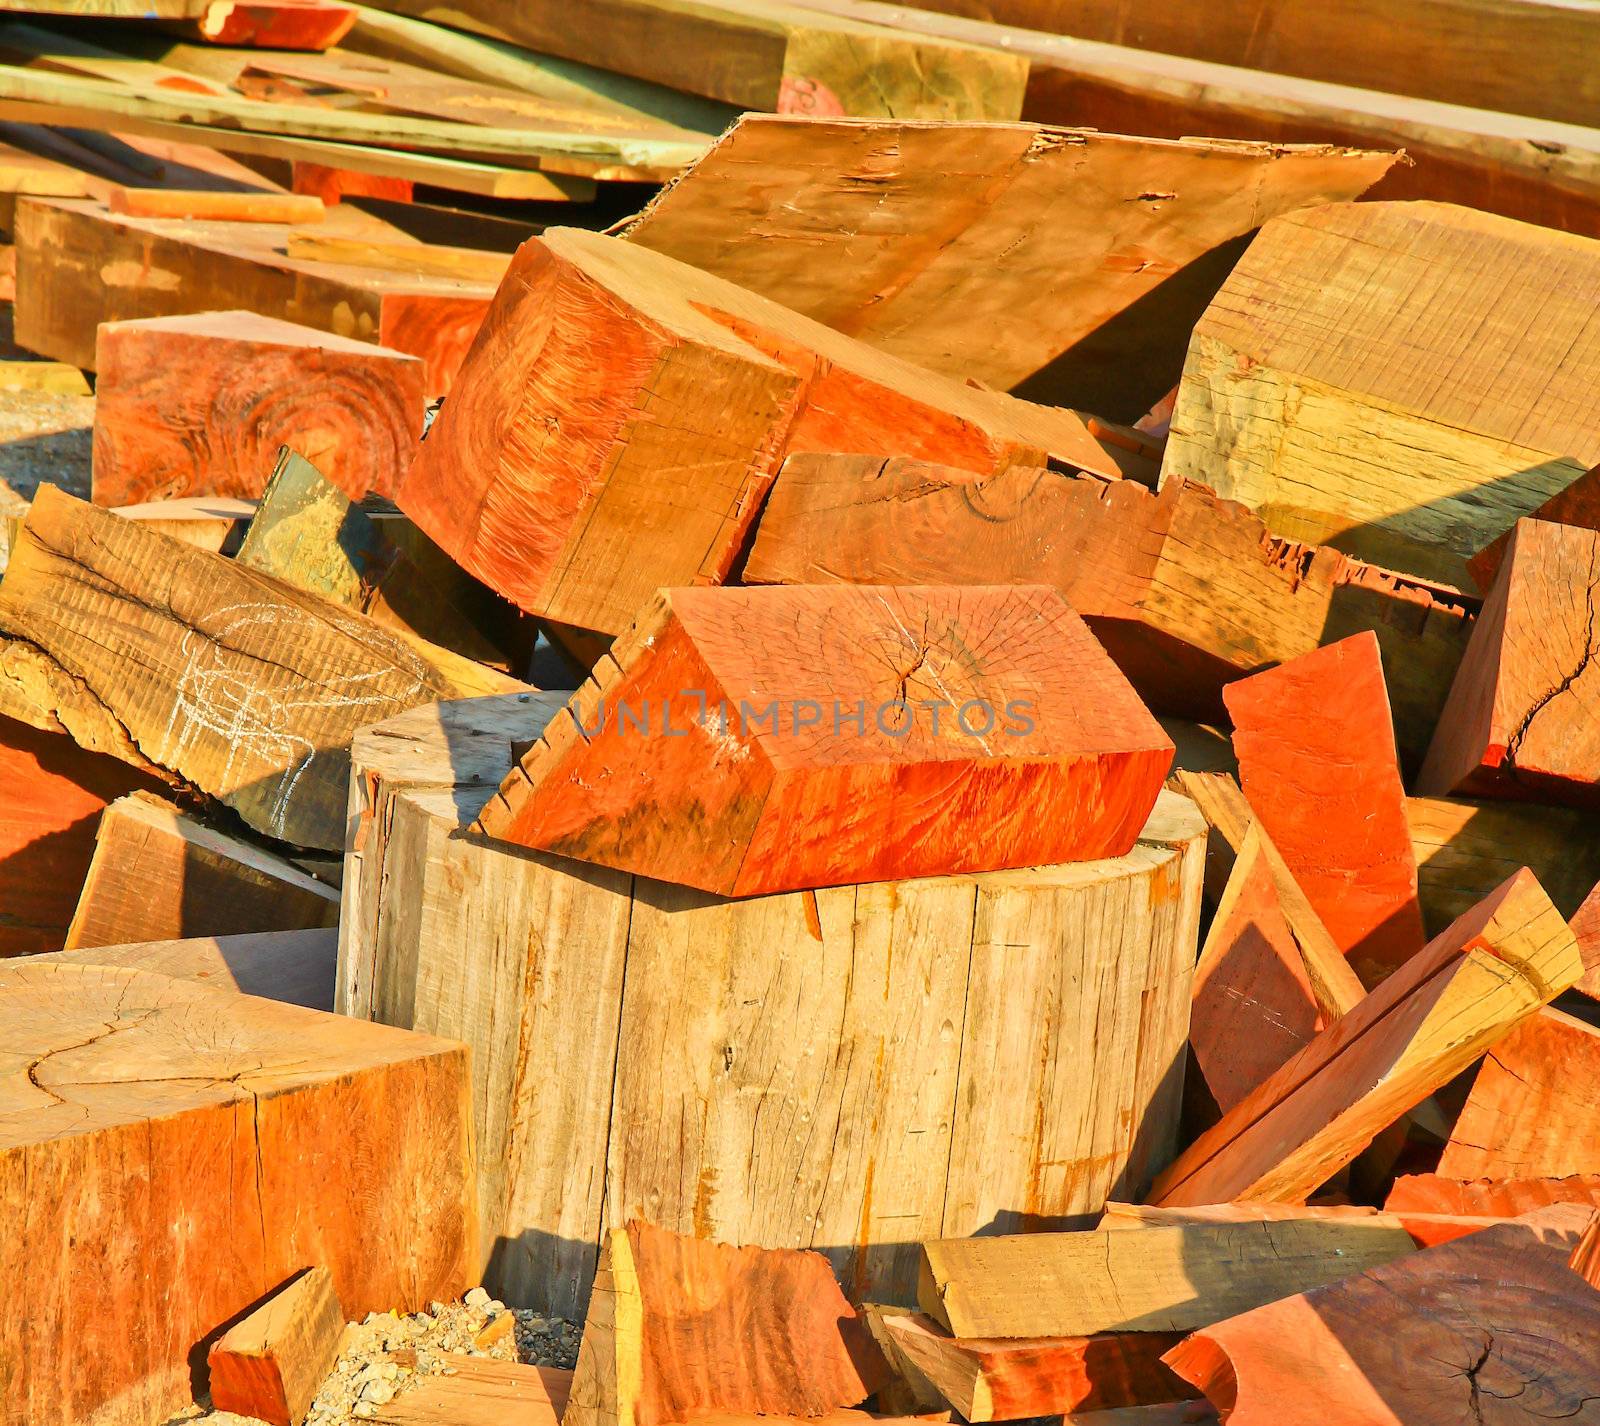 Pile of wood by Photoguide